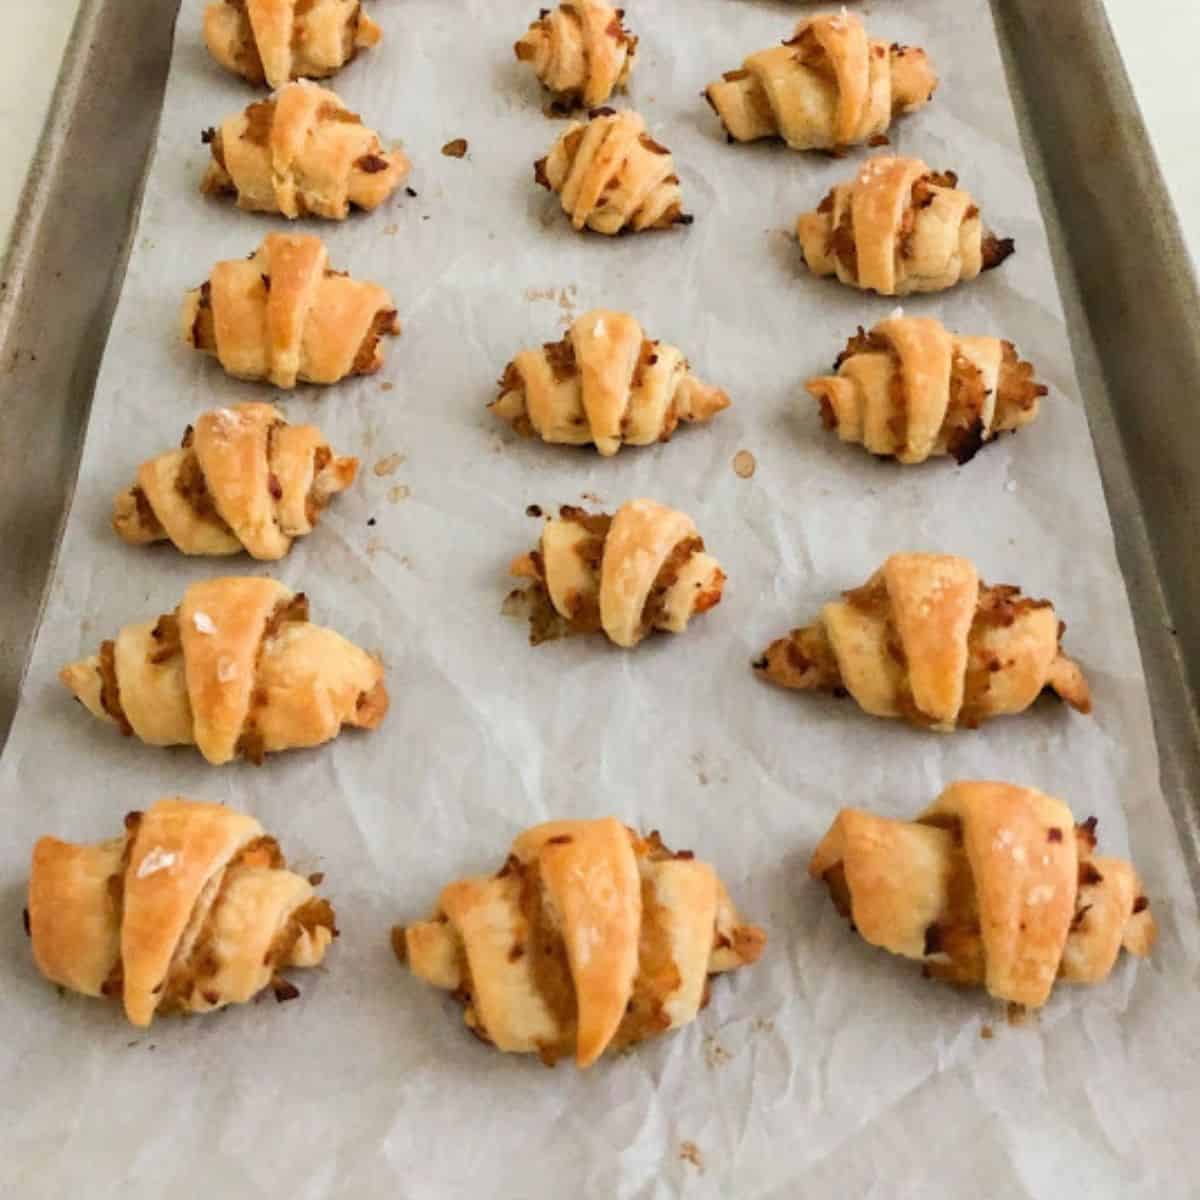 Baked rugelach on metal USA pan small sheet pan lined with parchment paper.